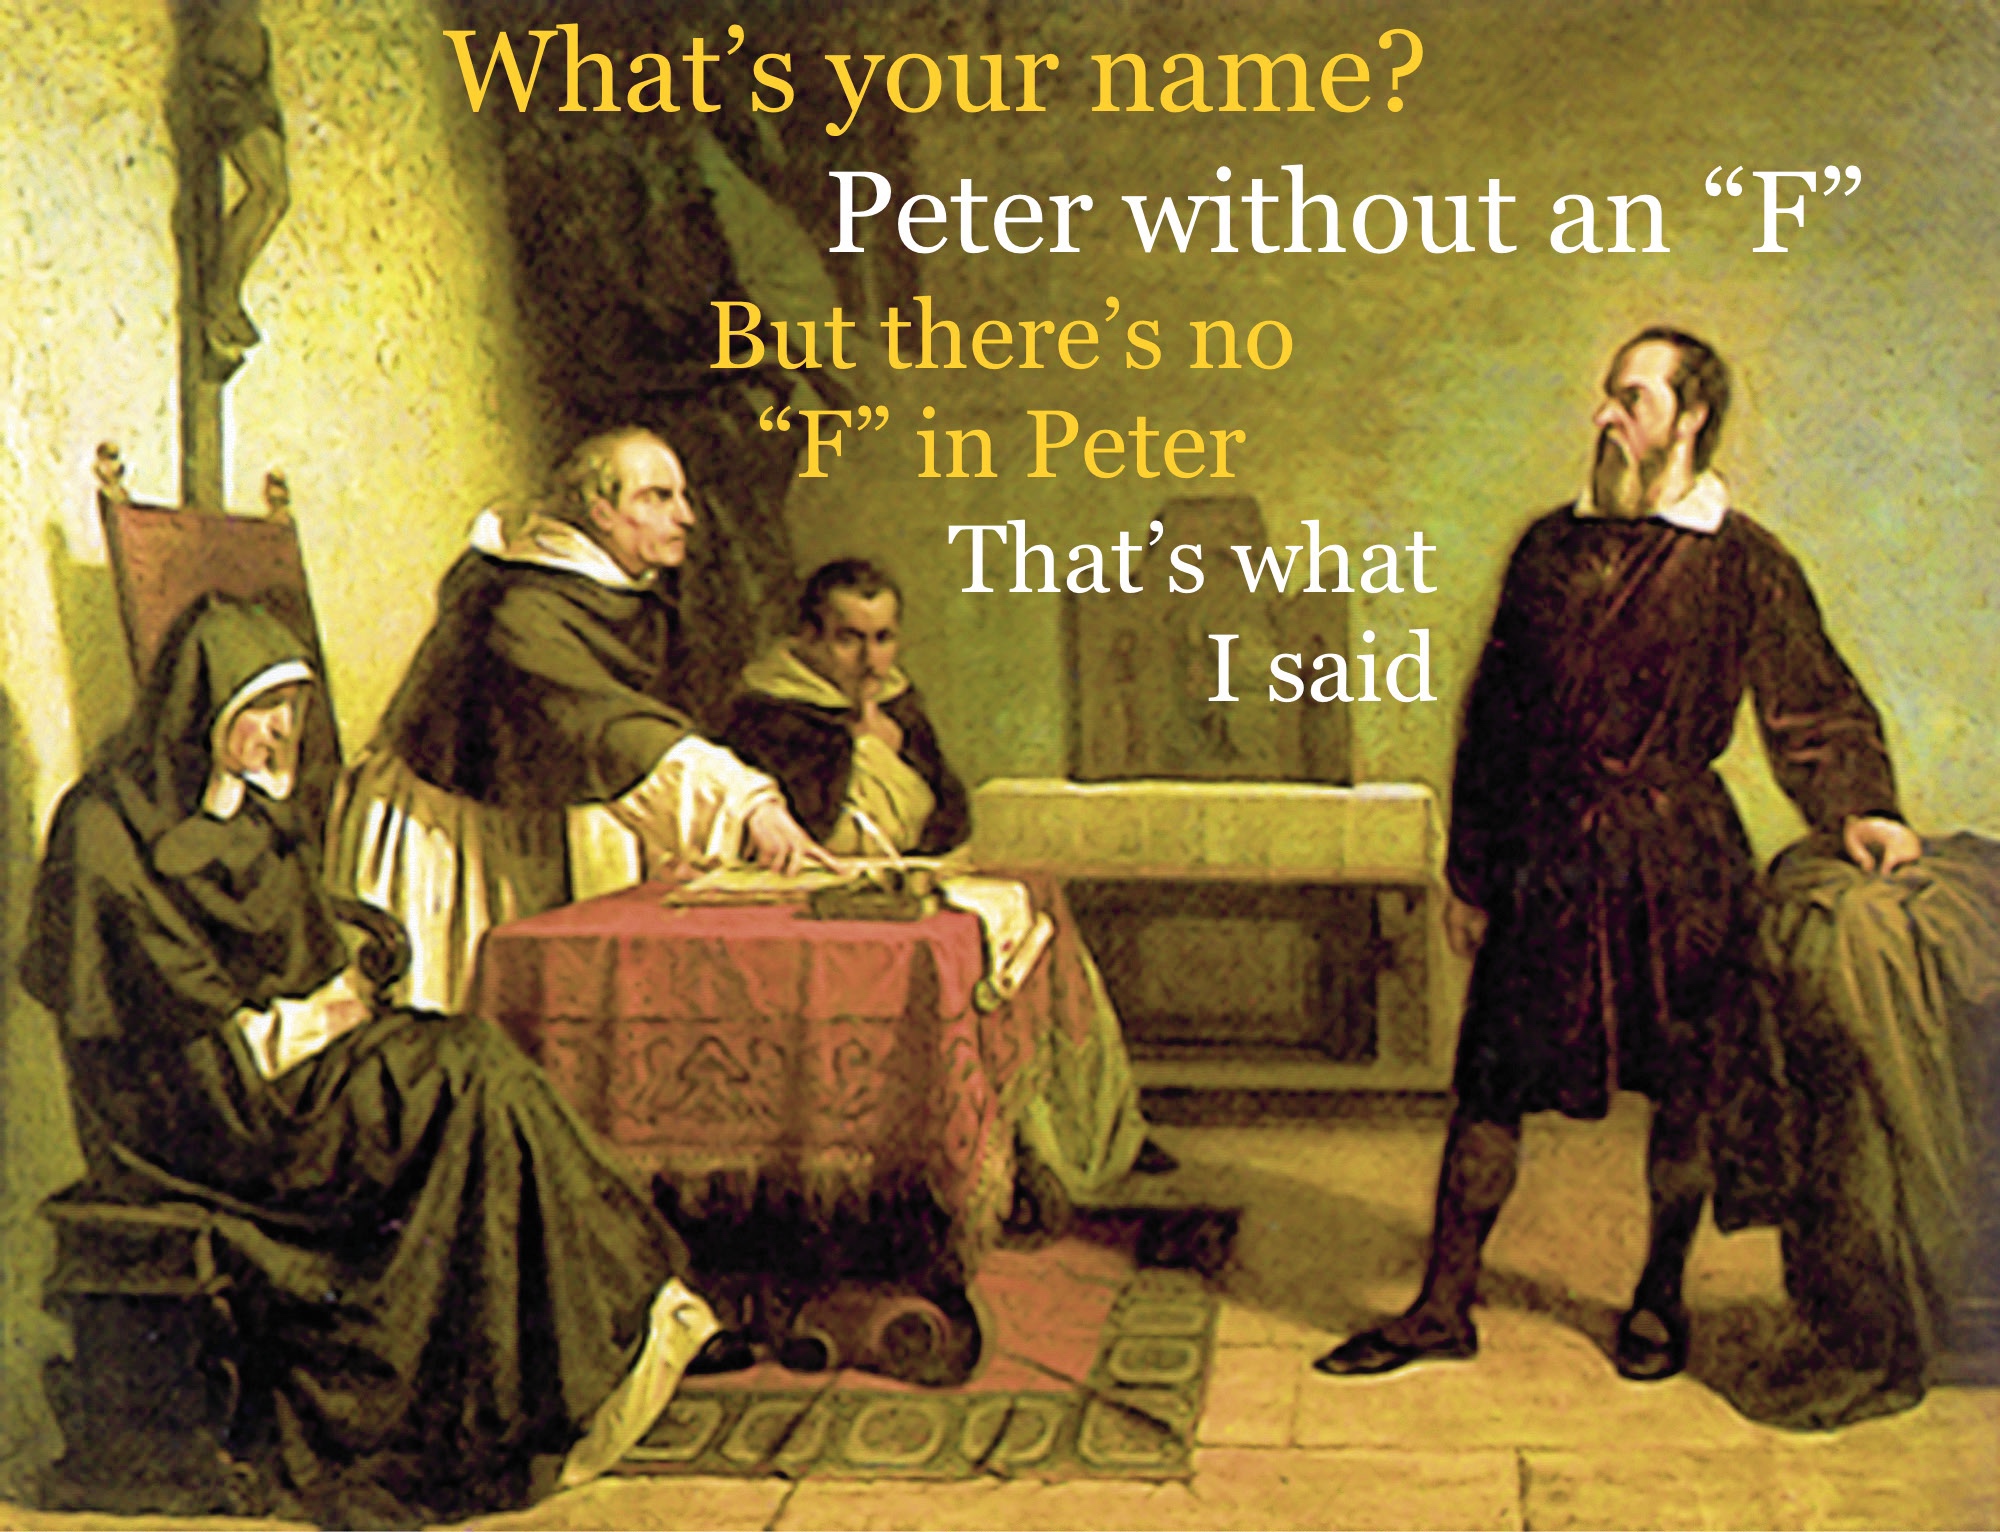 galileo galilei - What's your name? Peter without an F But there's no "F" in Peter That's what I said